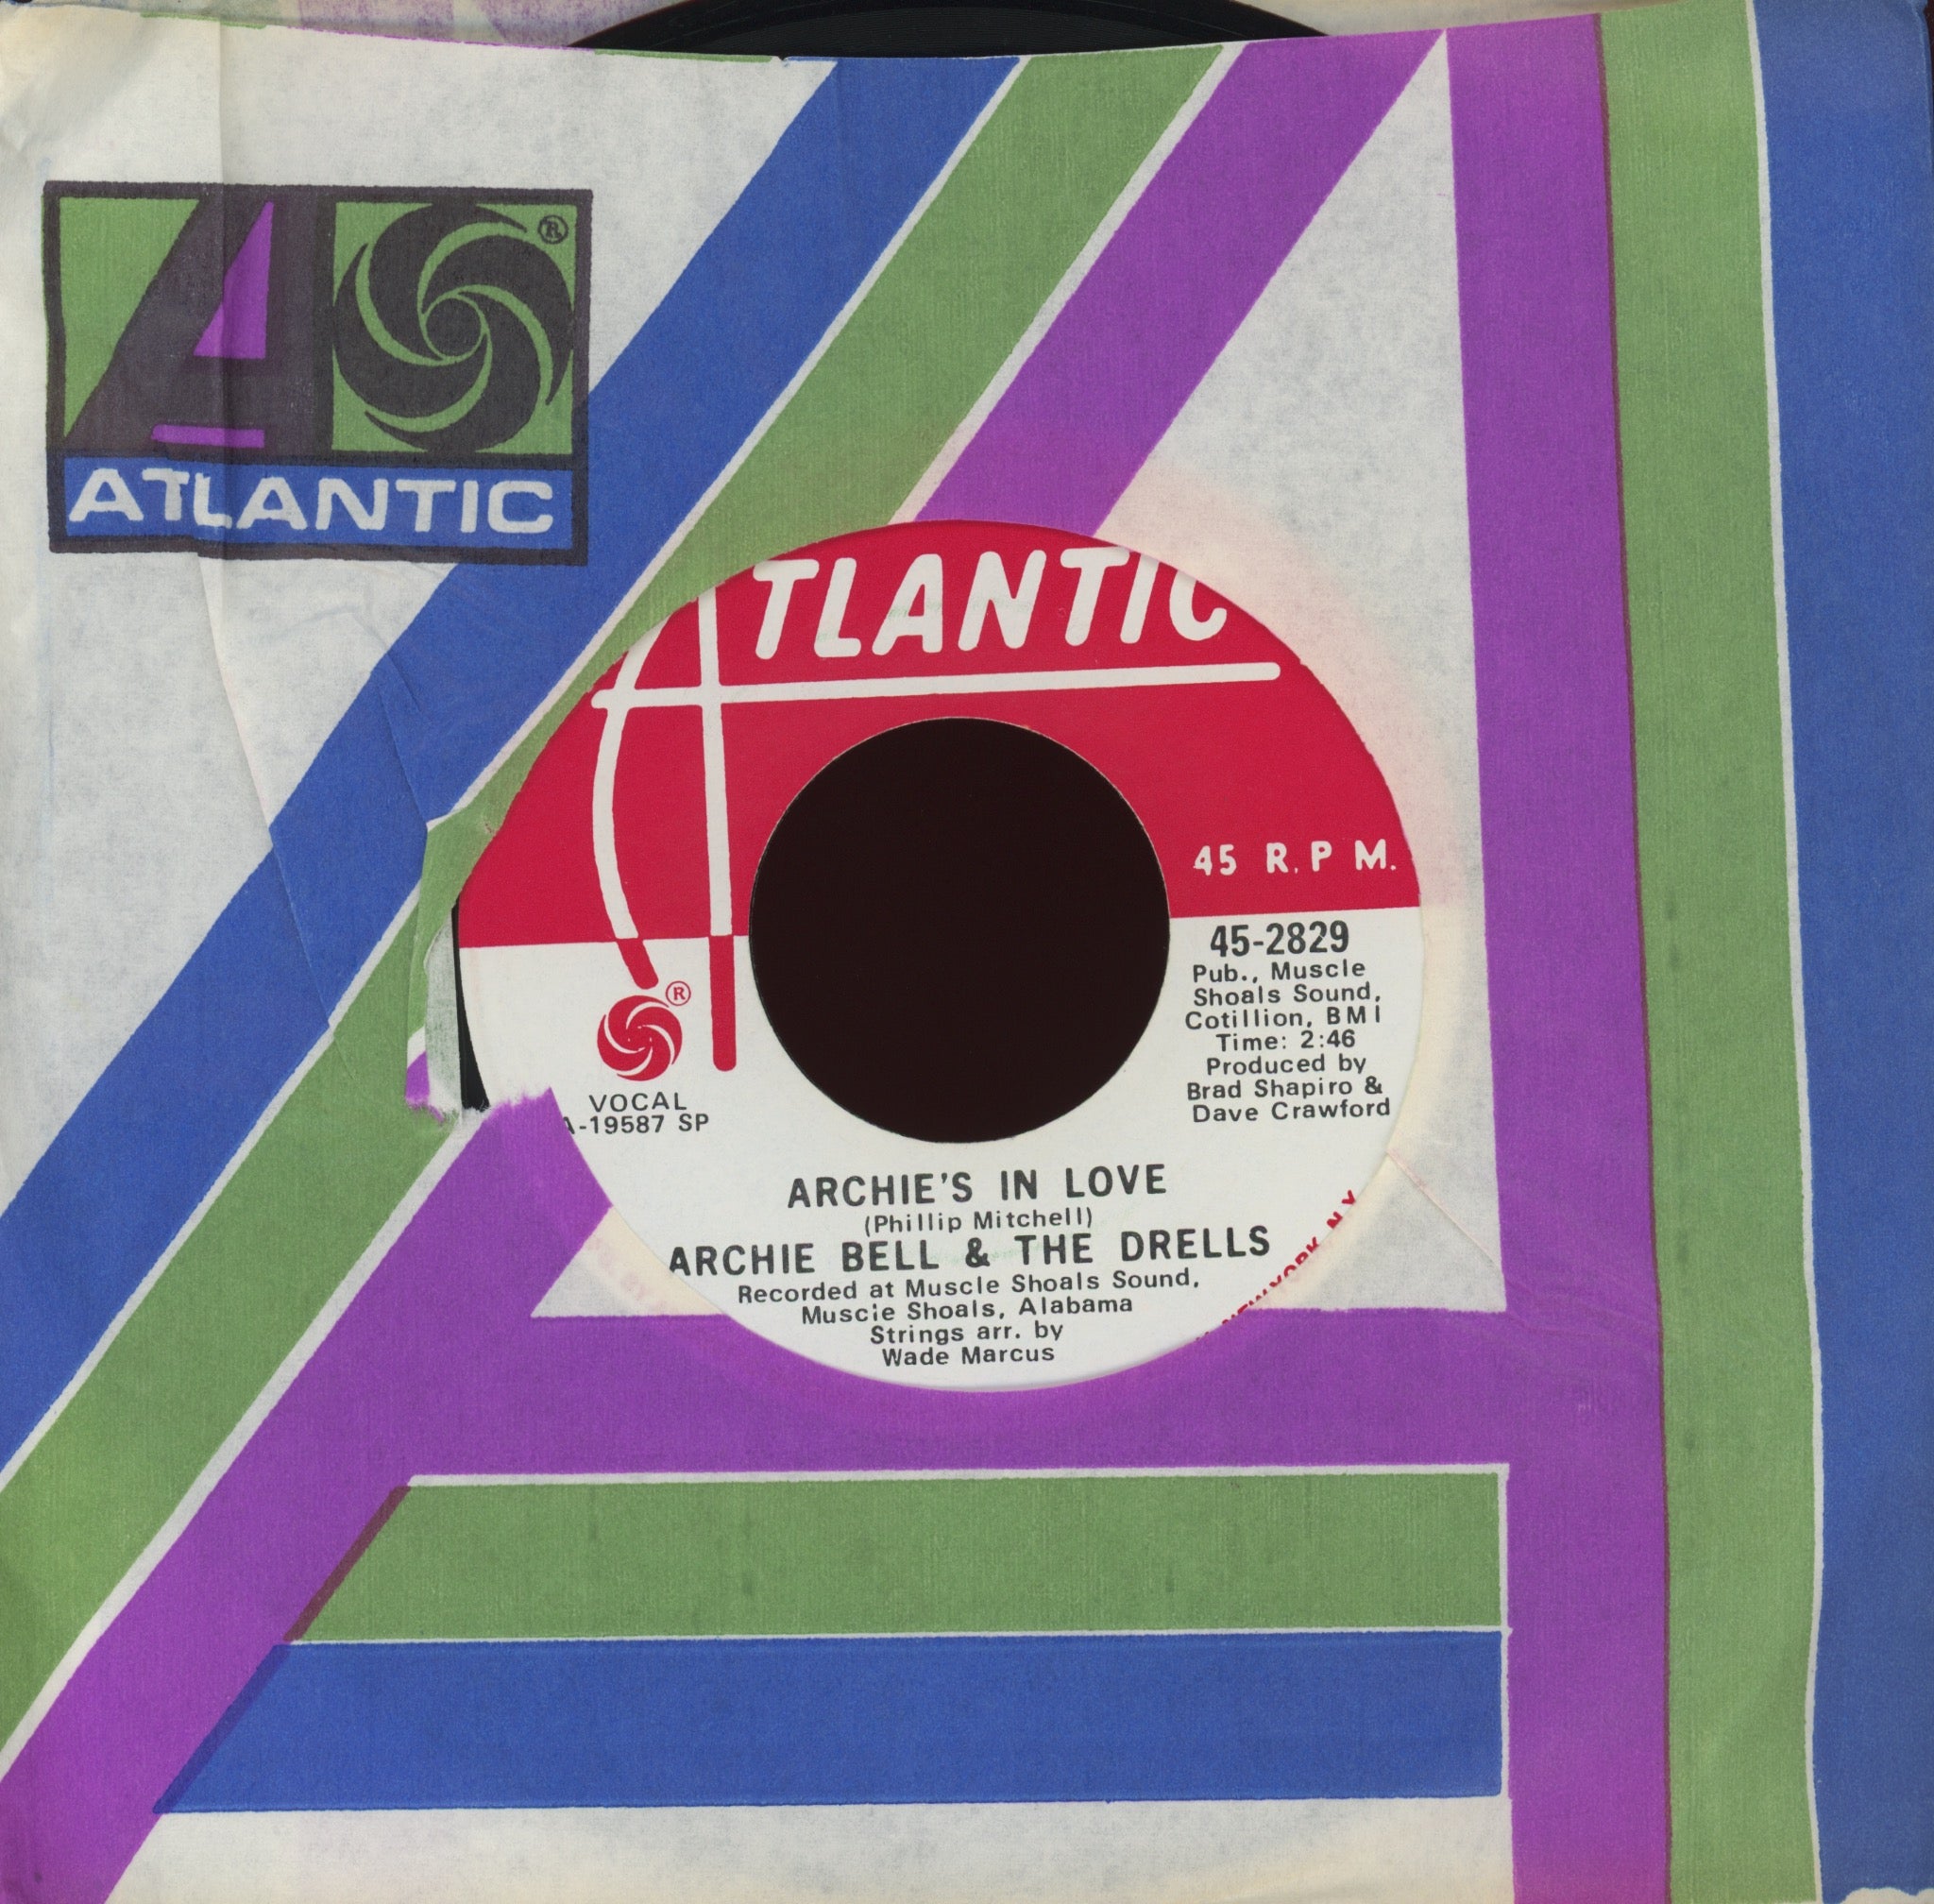 Archie Bell & The Drells - Archie's In Love on Atlantic Promo